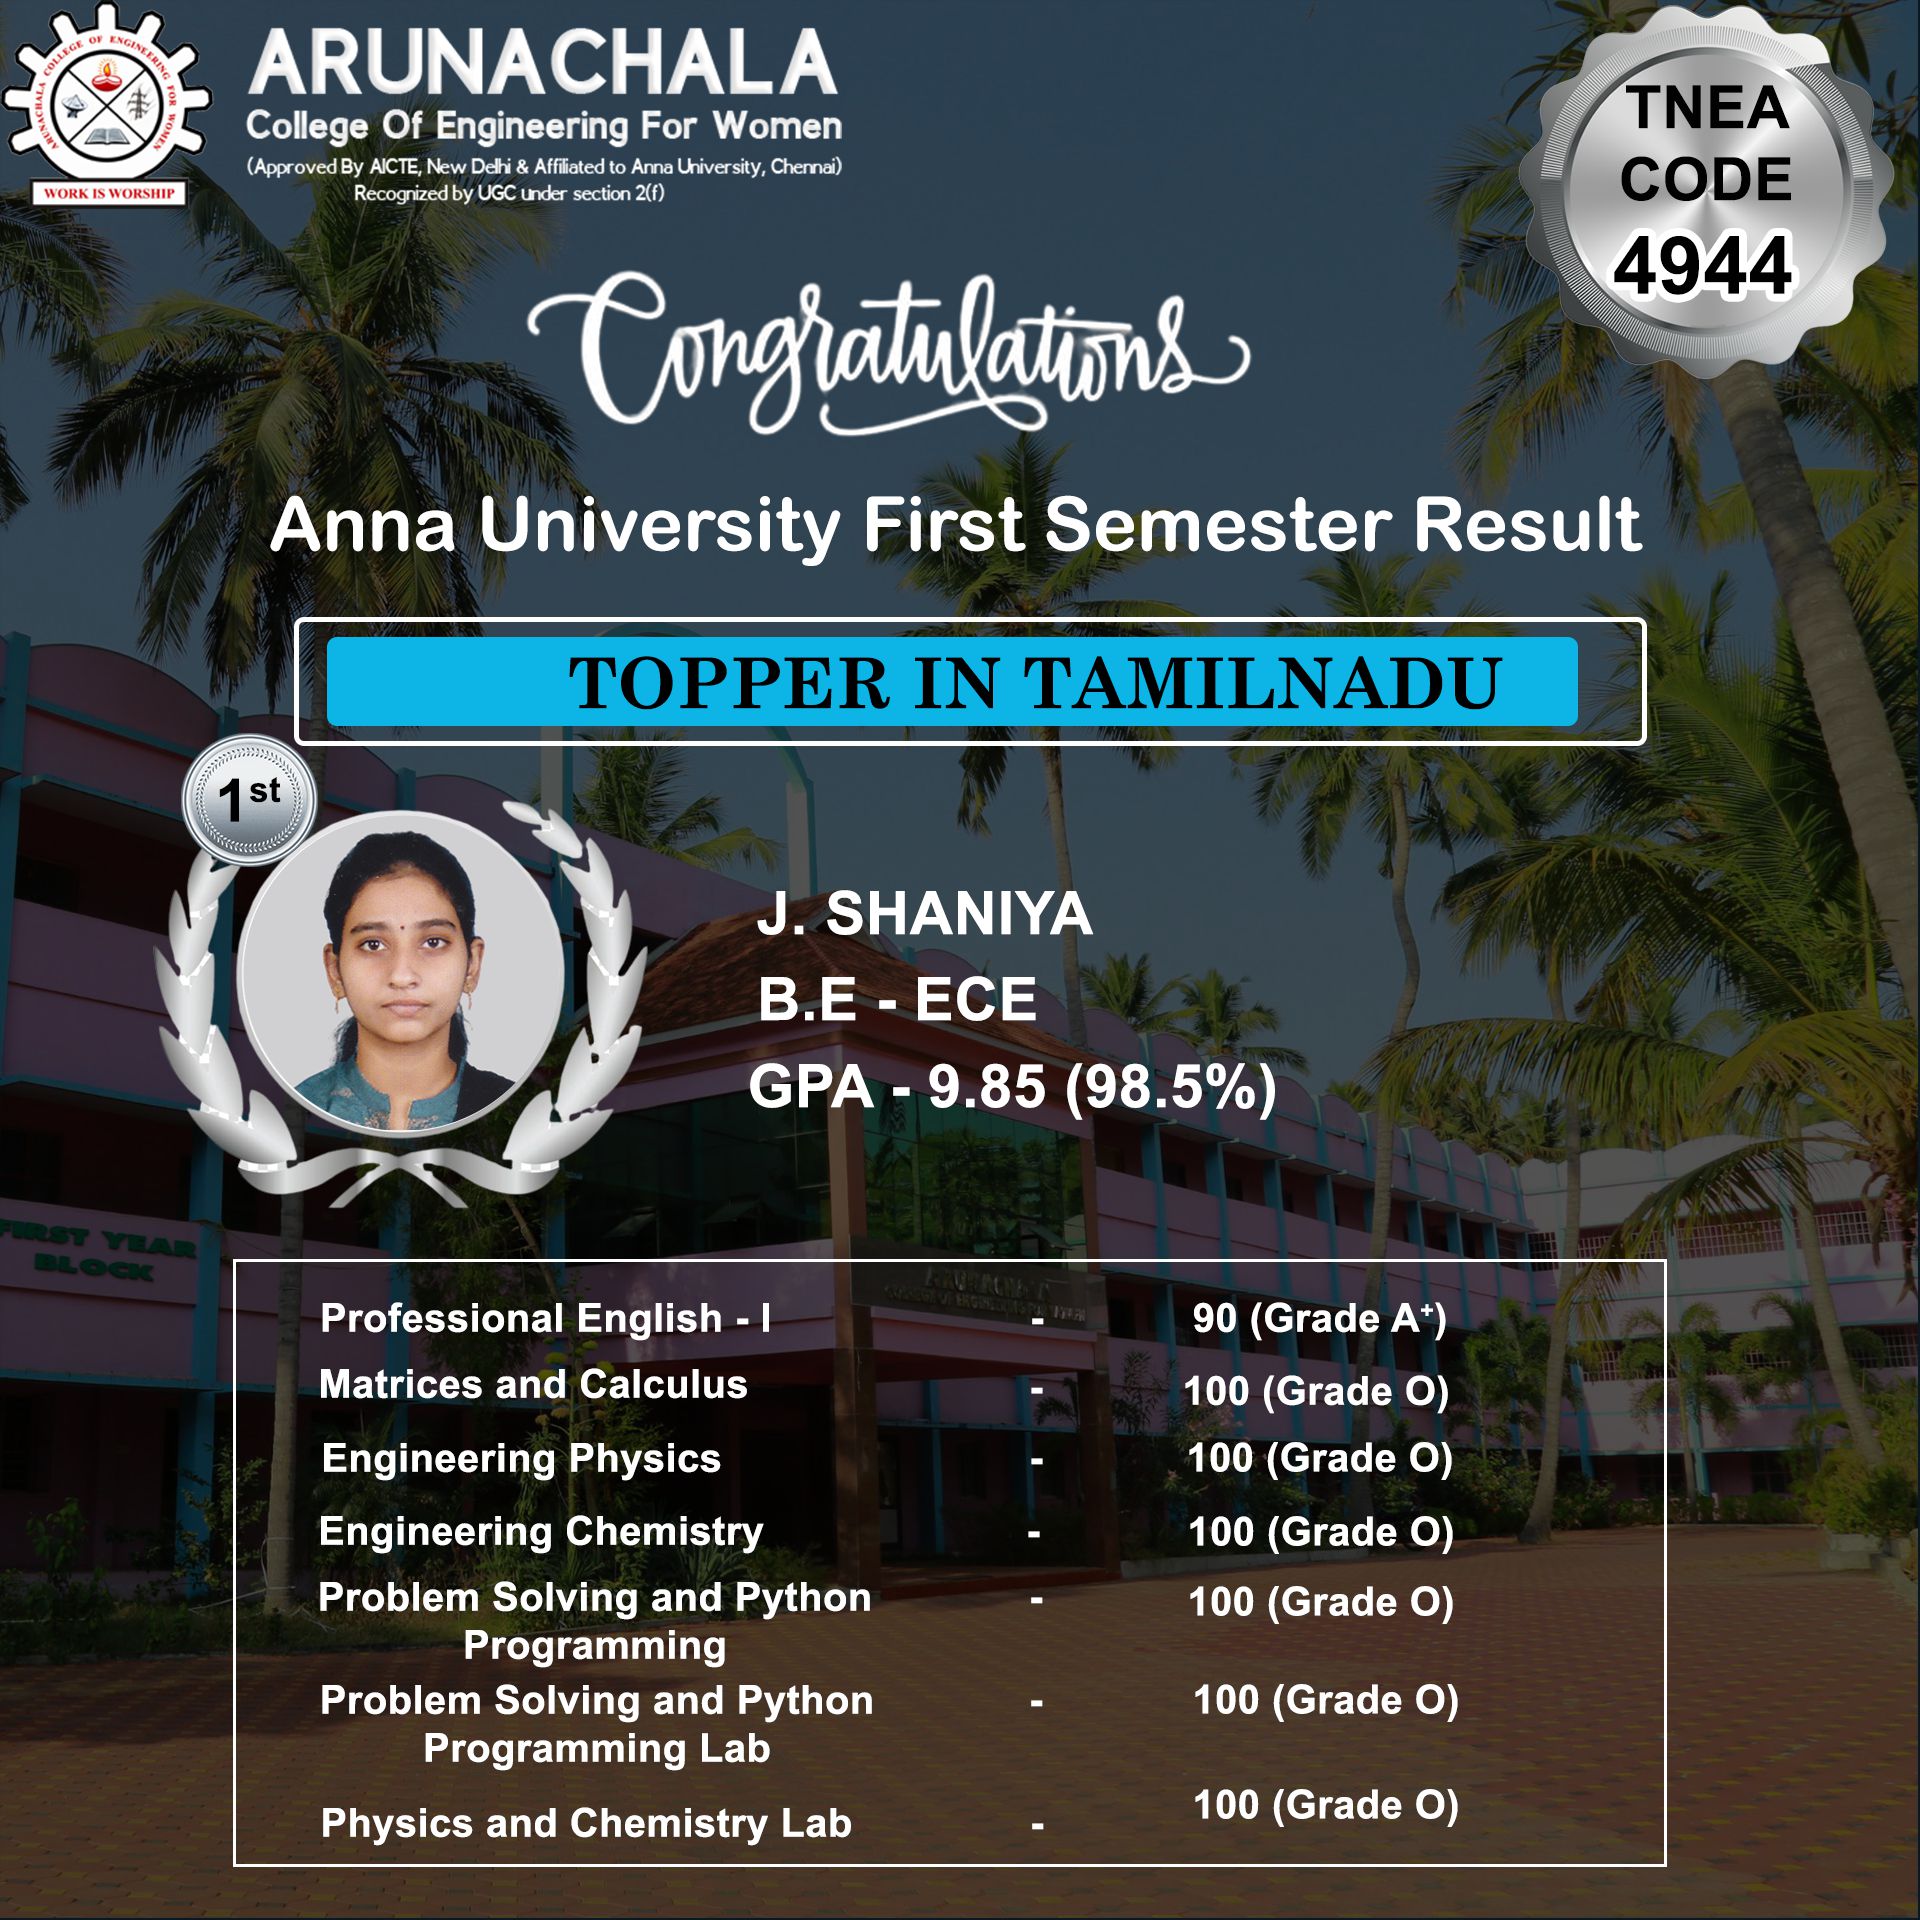 Congratulations to Ms. SHANIYA. J for your great achievement in Anna University First Semester Result.